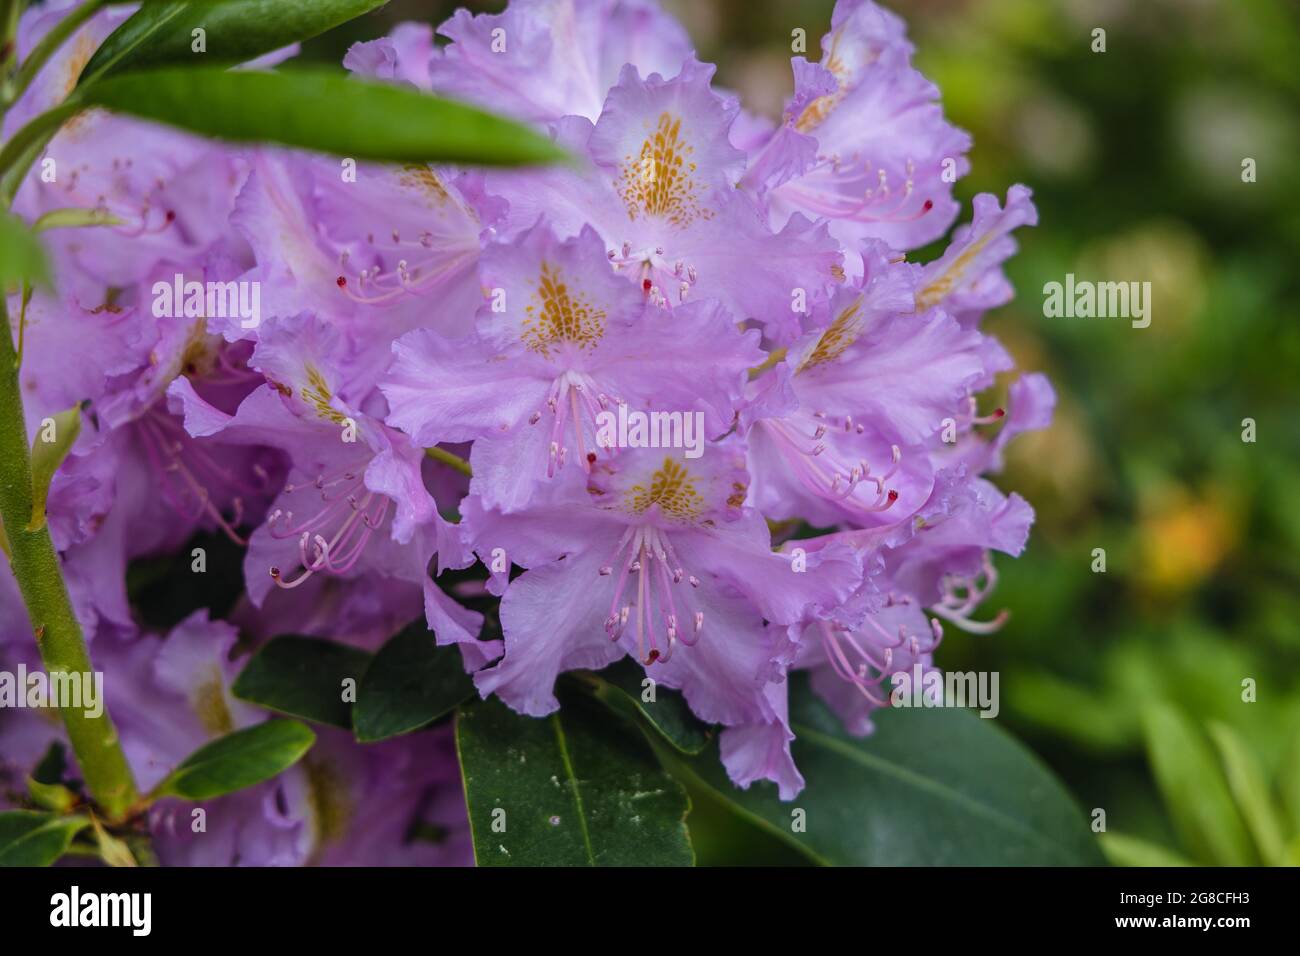 Rhododendron flowers in the garden, variety callled Cunninghams White Stock Photo